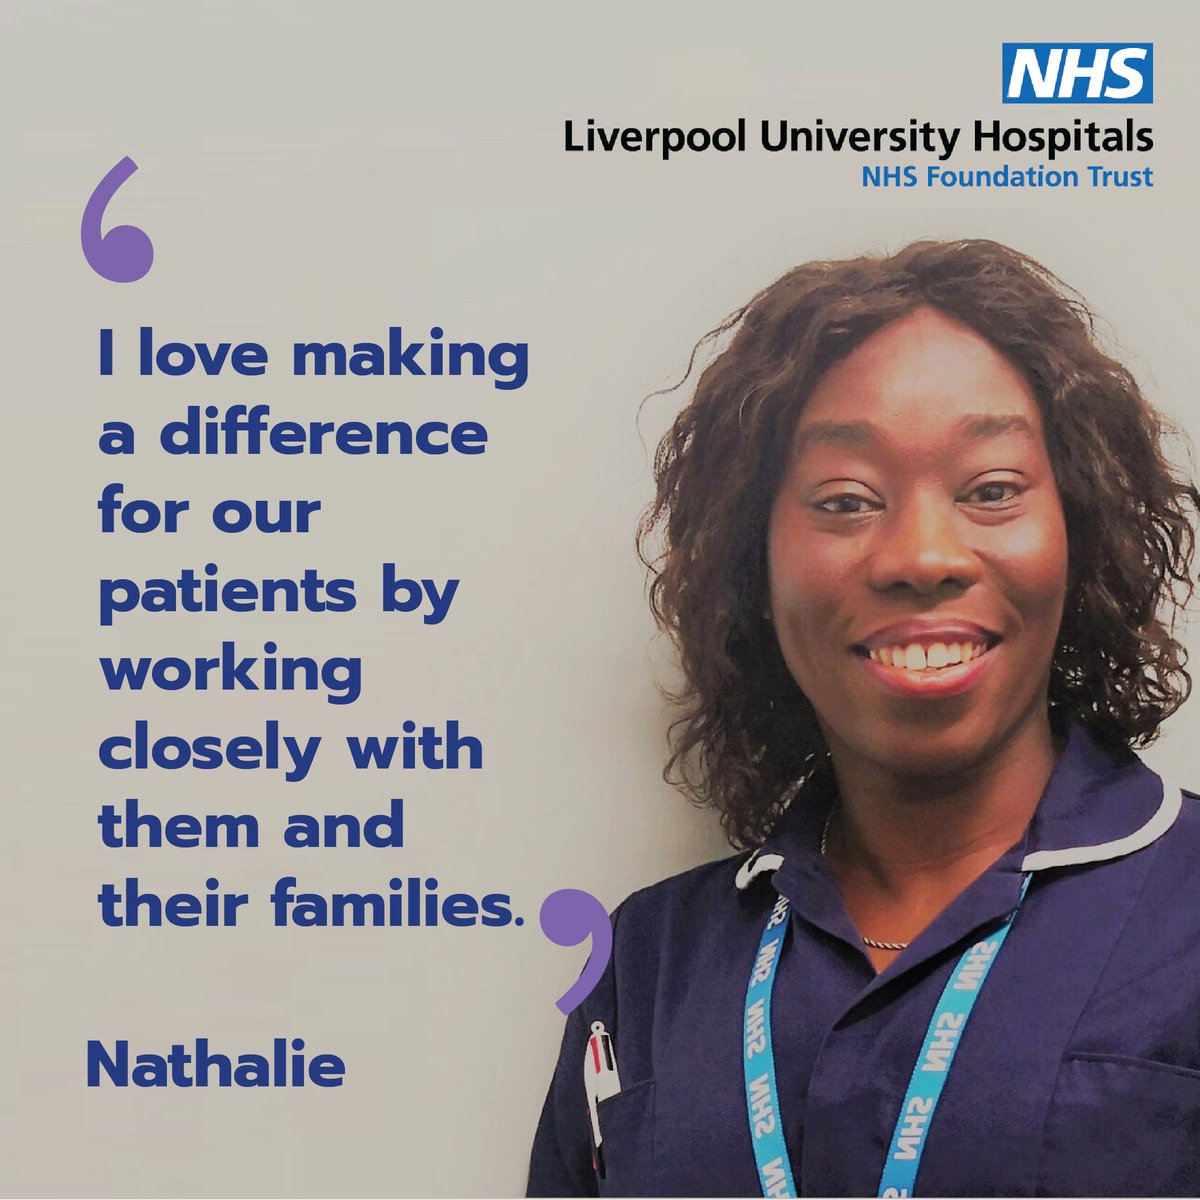 'My work as a Clinical Research Network (CRN) as a Senior Research Nurse within the Research means a lot to me. 'Being an agile research nurse with the CRN has provided me with opportunities to work across the North West.' - Nathalie Nicholas, CRN Senior Research Nurse